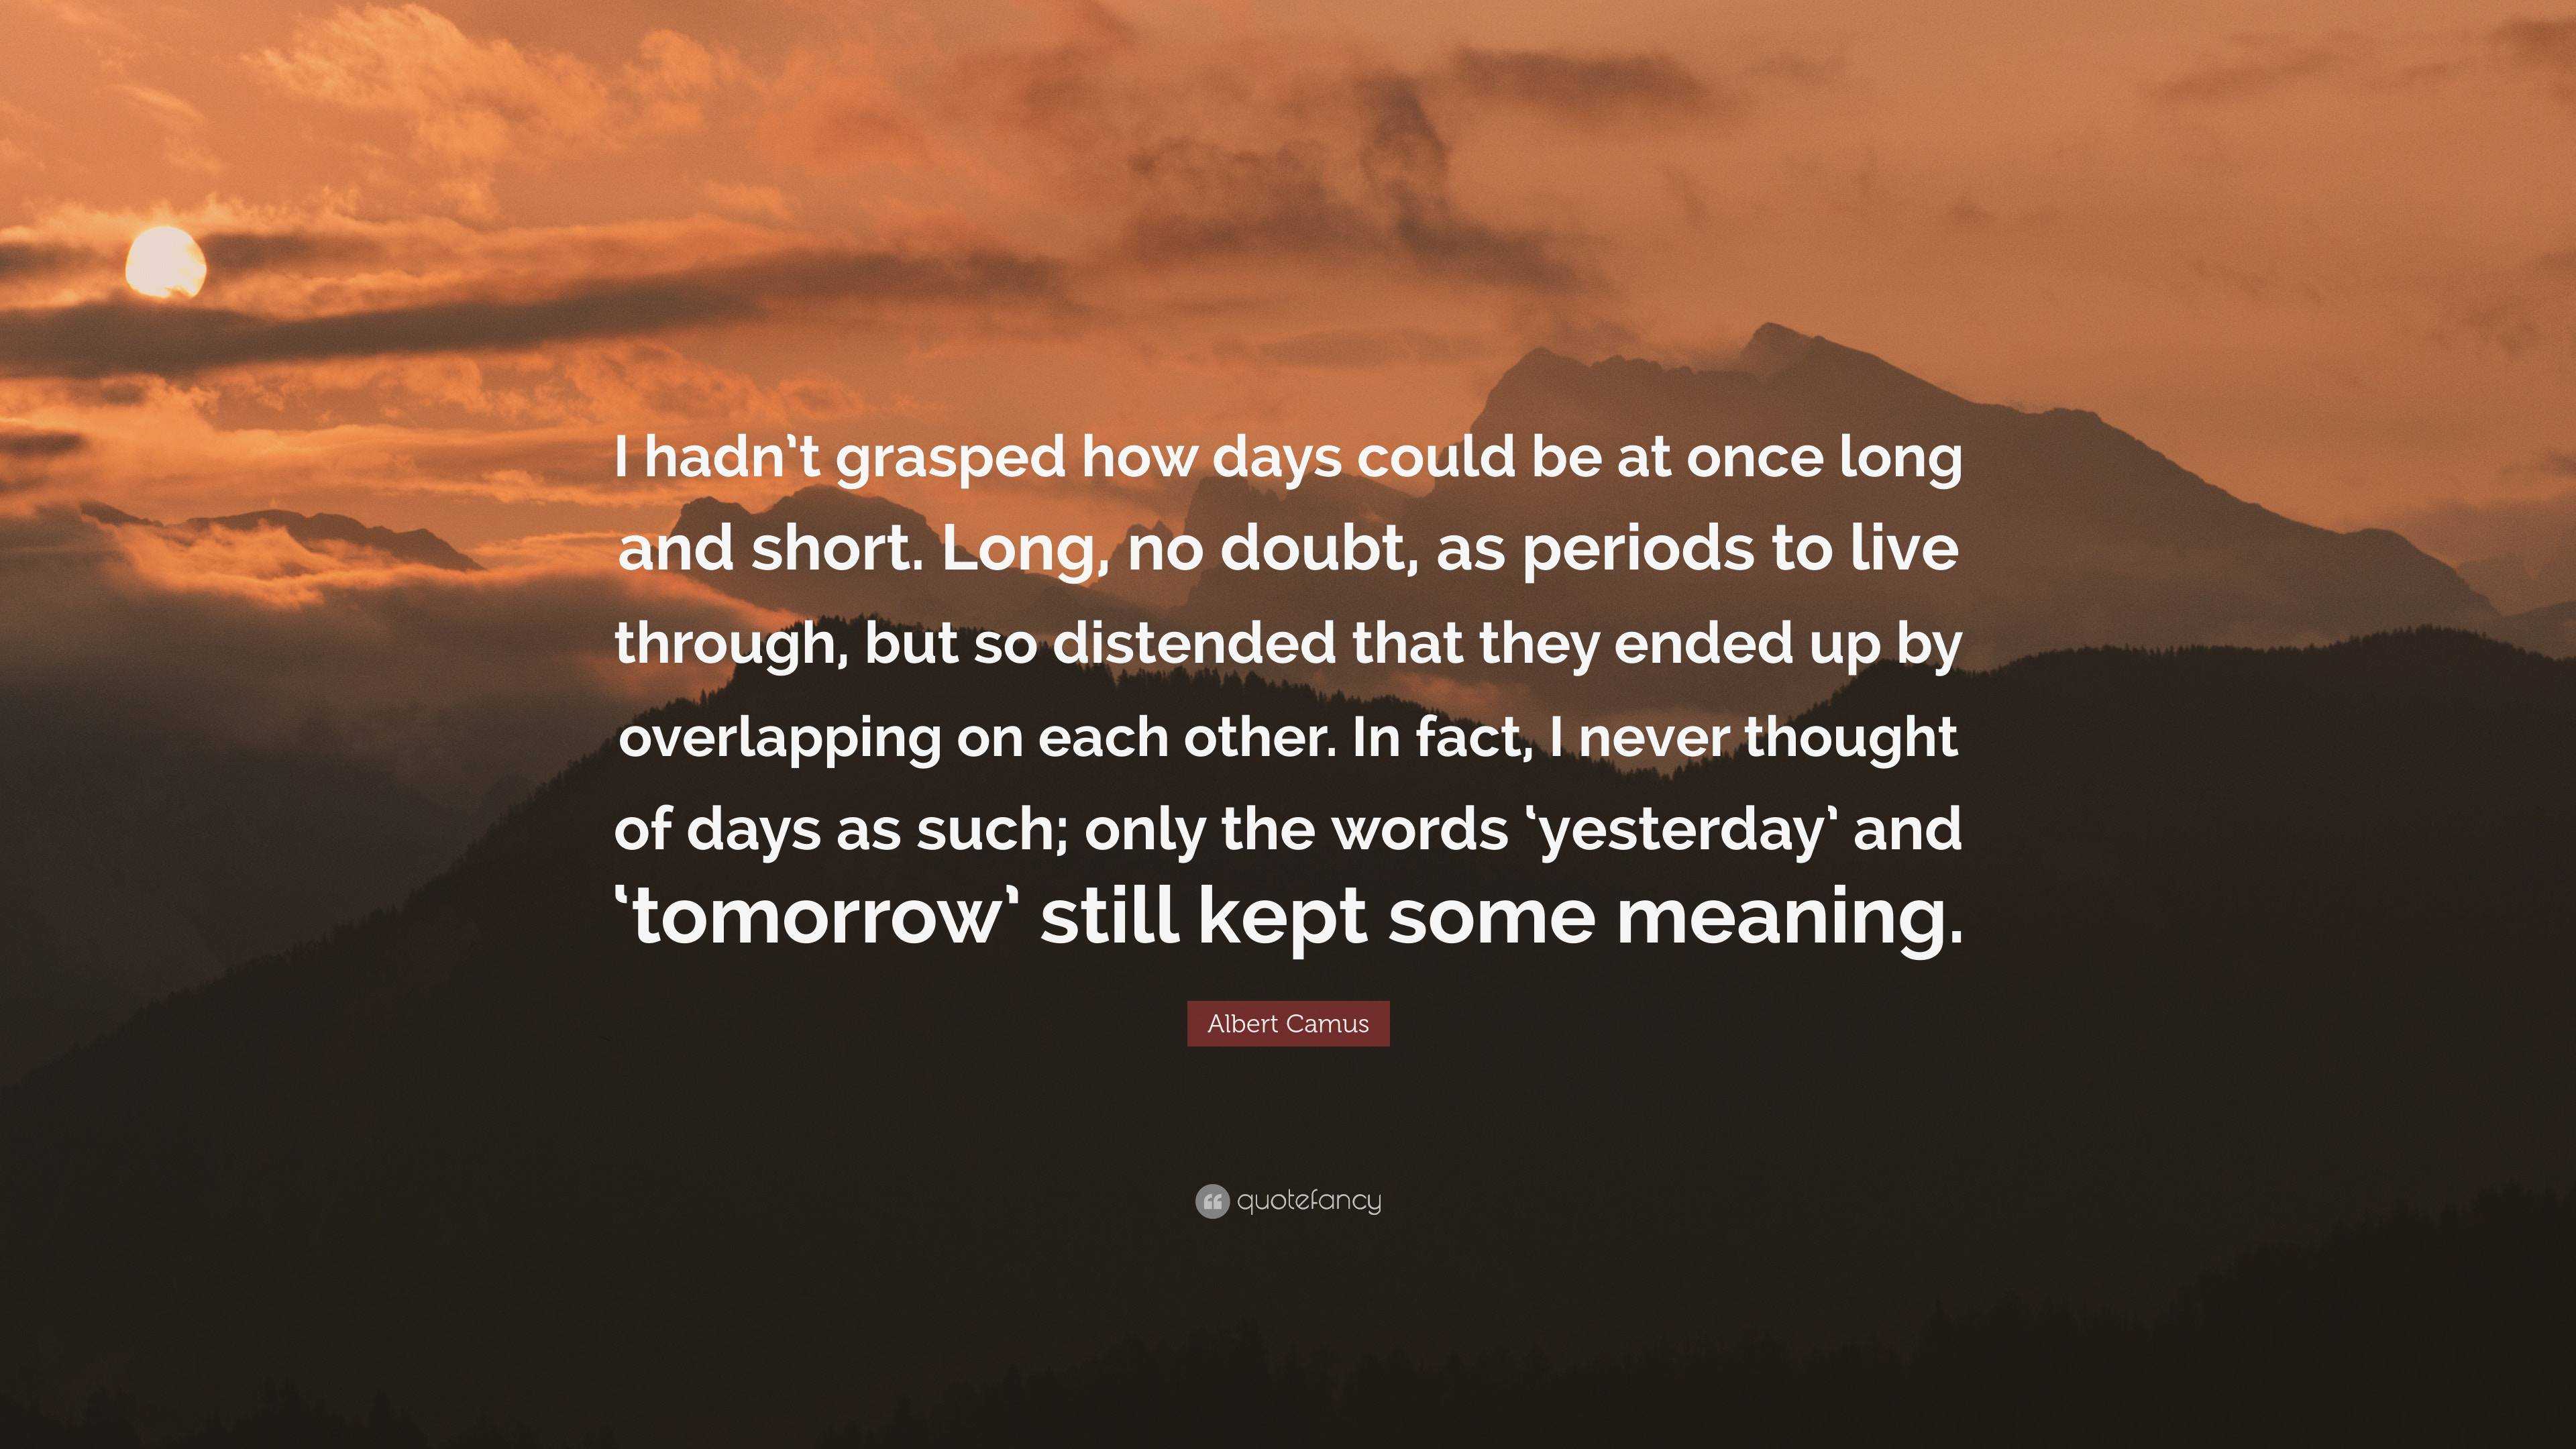 Albert Camus Quote: “I hadn’t grasped how days could be at once long ...